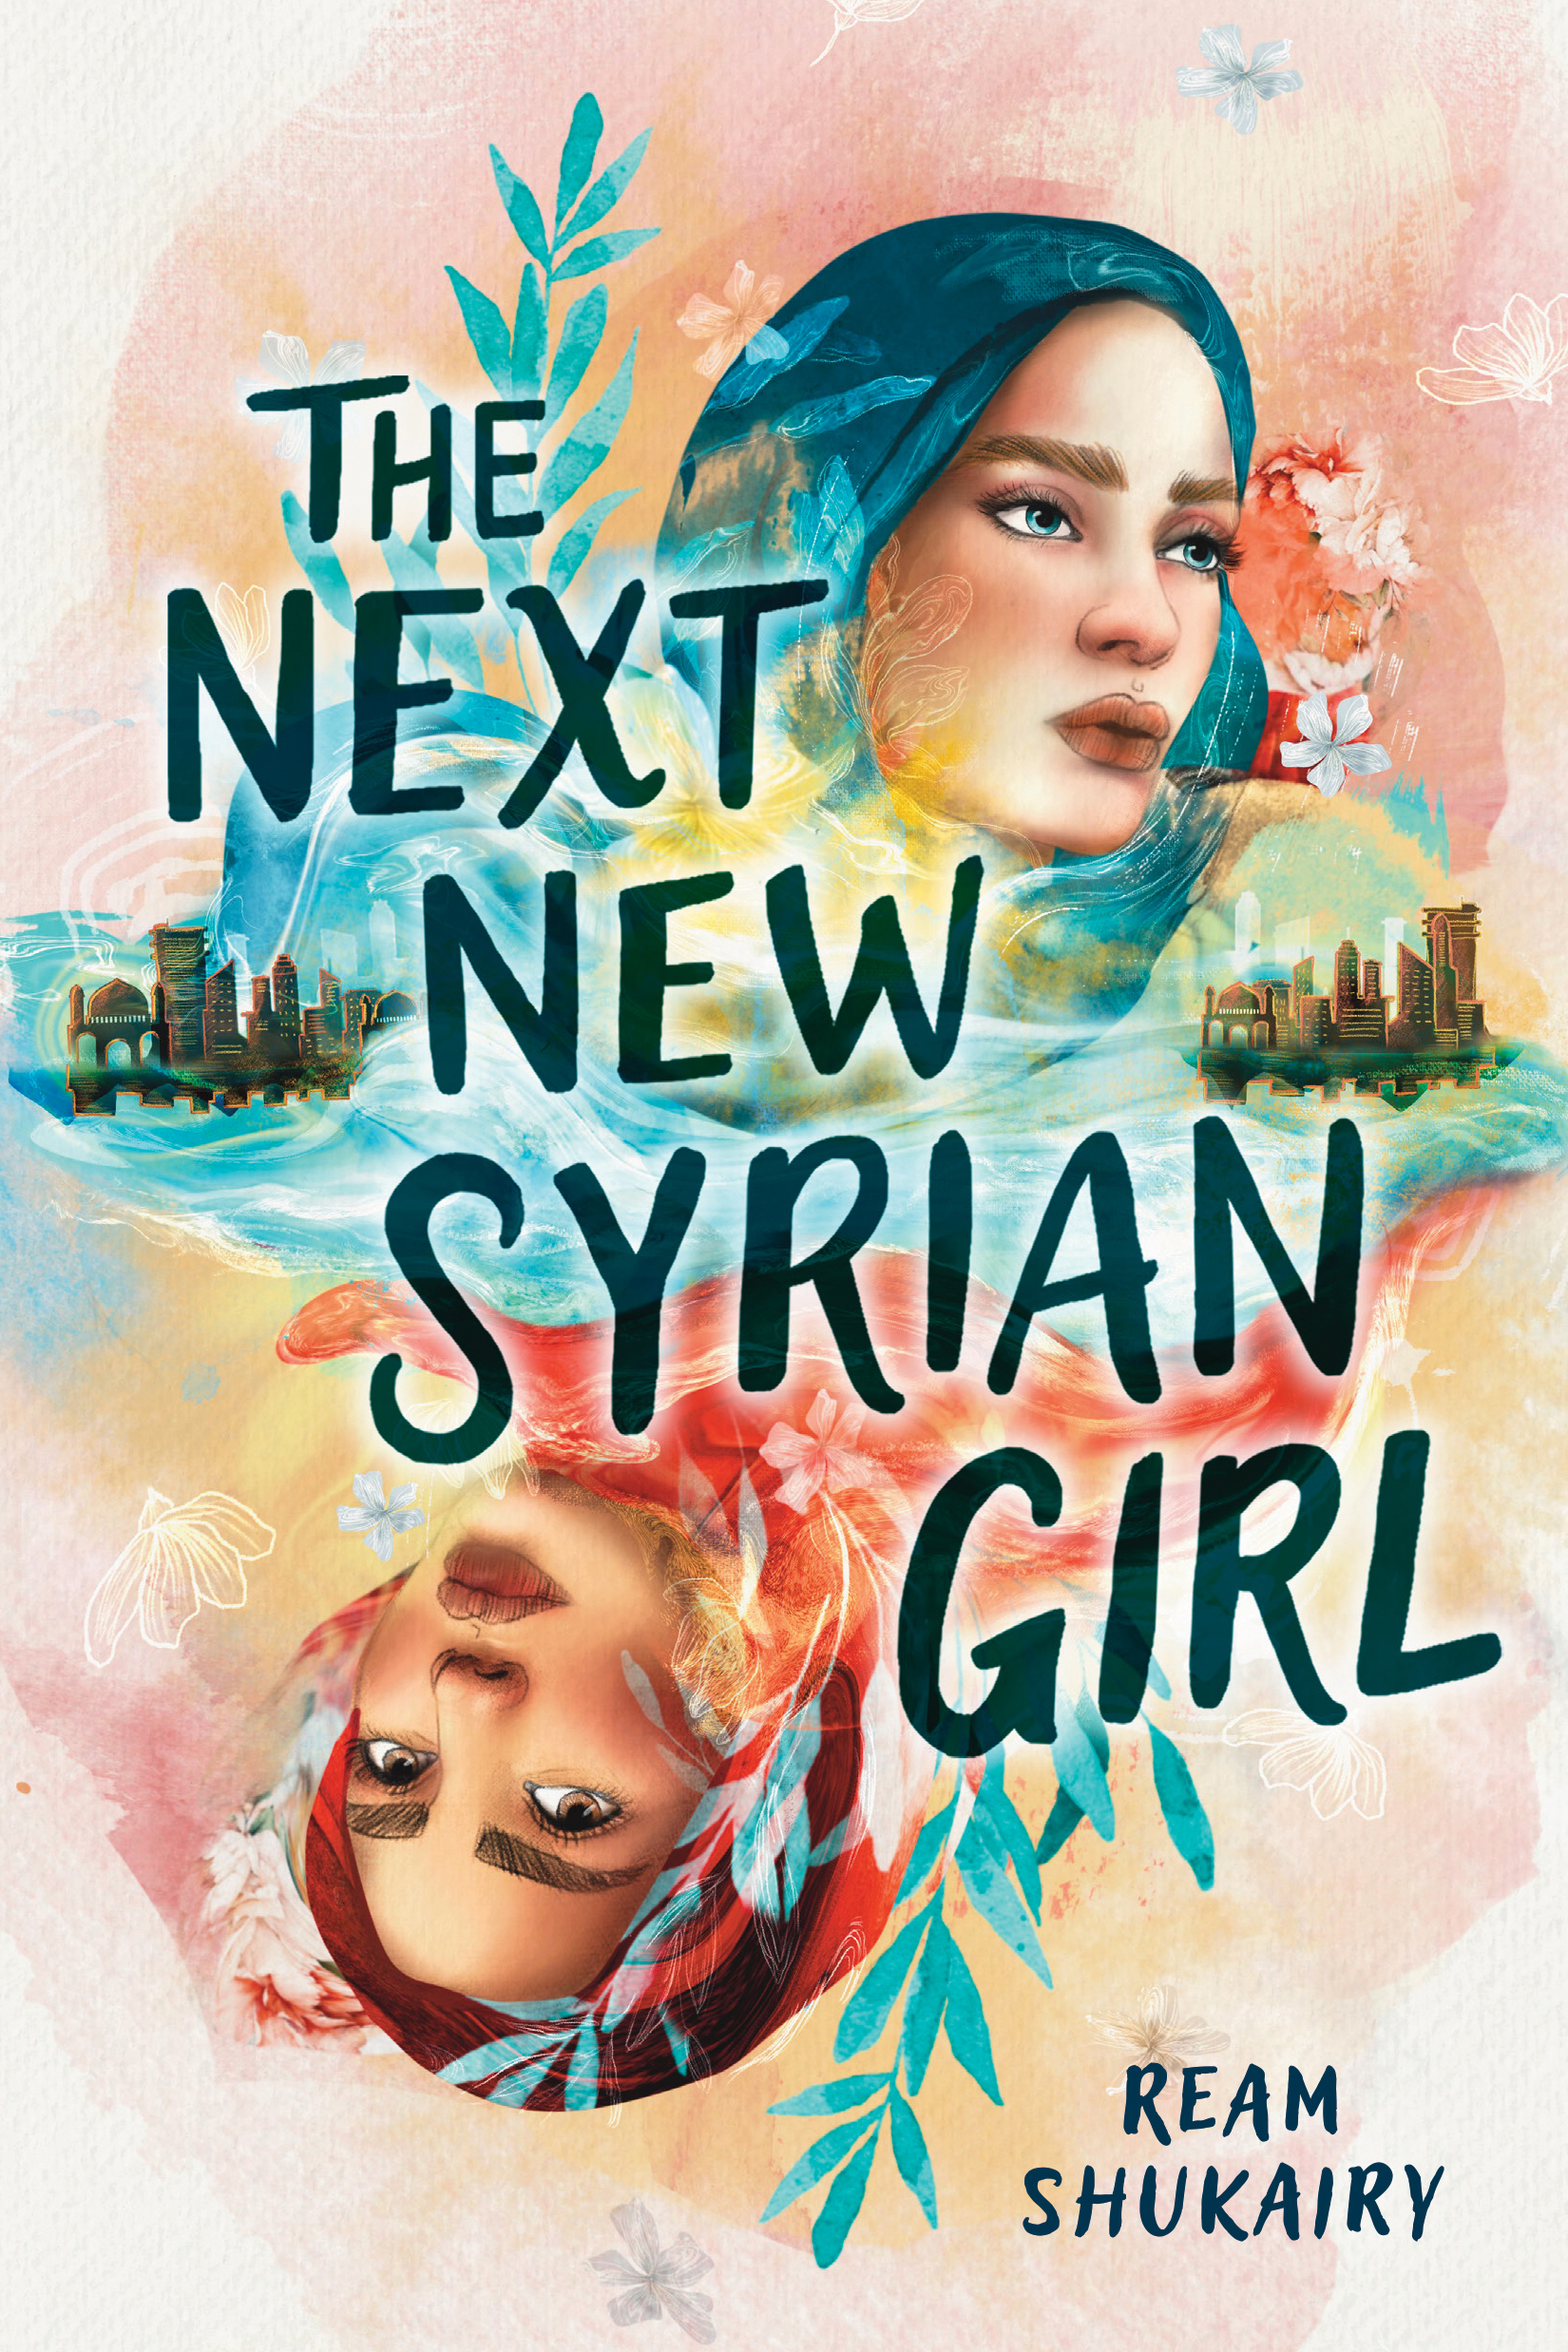 Cover of The Next New Syrian Girl by Ream Shukairy